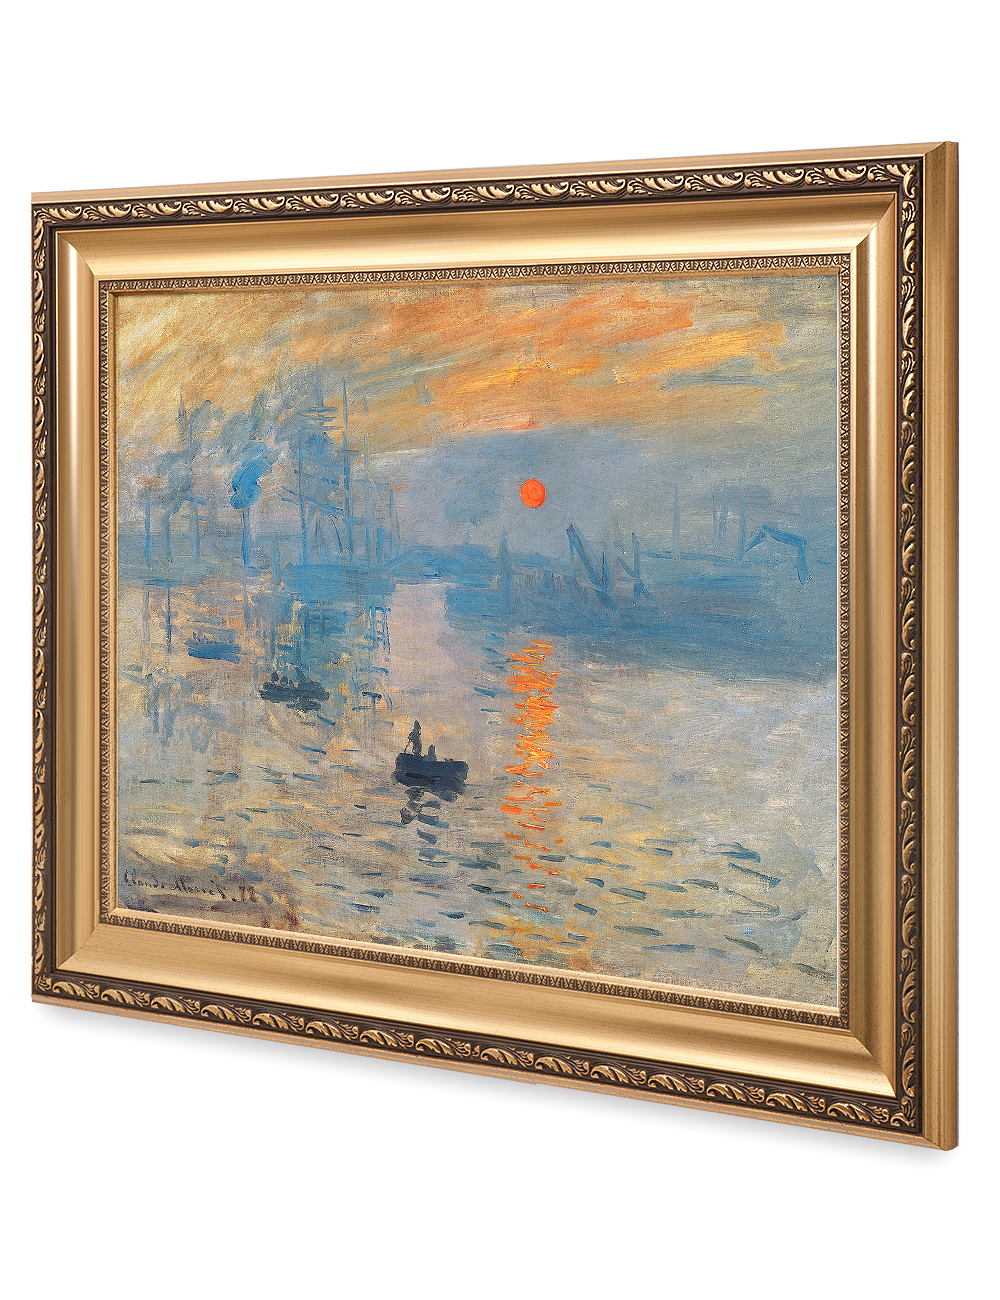 DECORARTS Impression Sunrise by Claude Monet. Classic Art Reproduction, Giclee  Print on Canvas. Ready to Hang Framed Wall Art for Home and Office Decor.  Total Size w/ Frame: 30x26